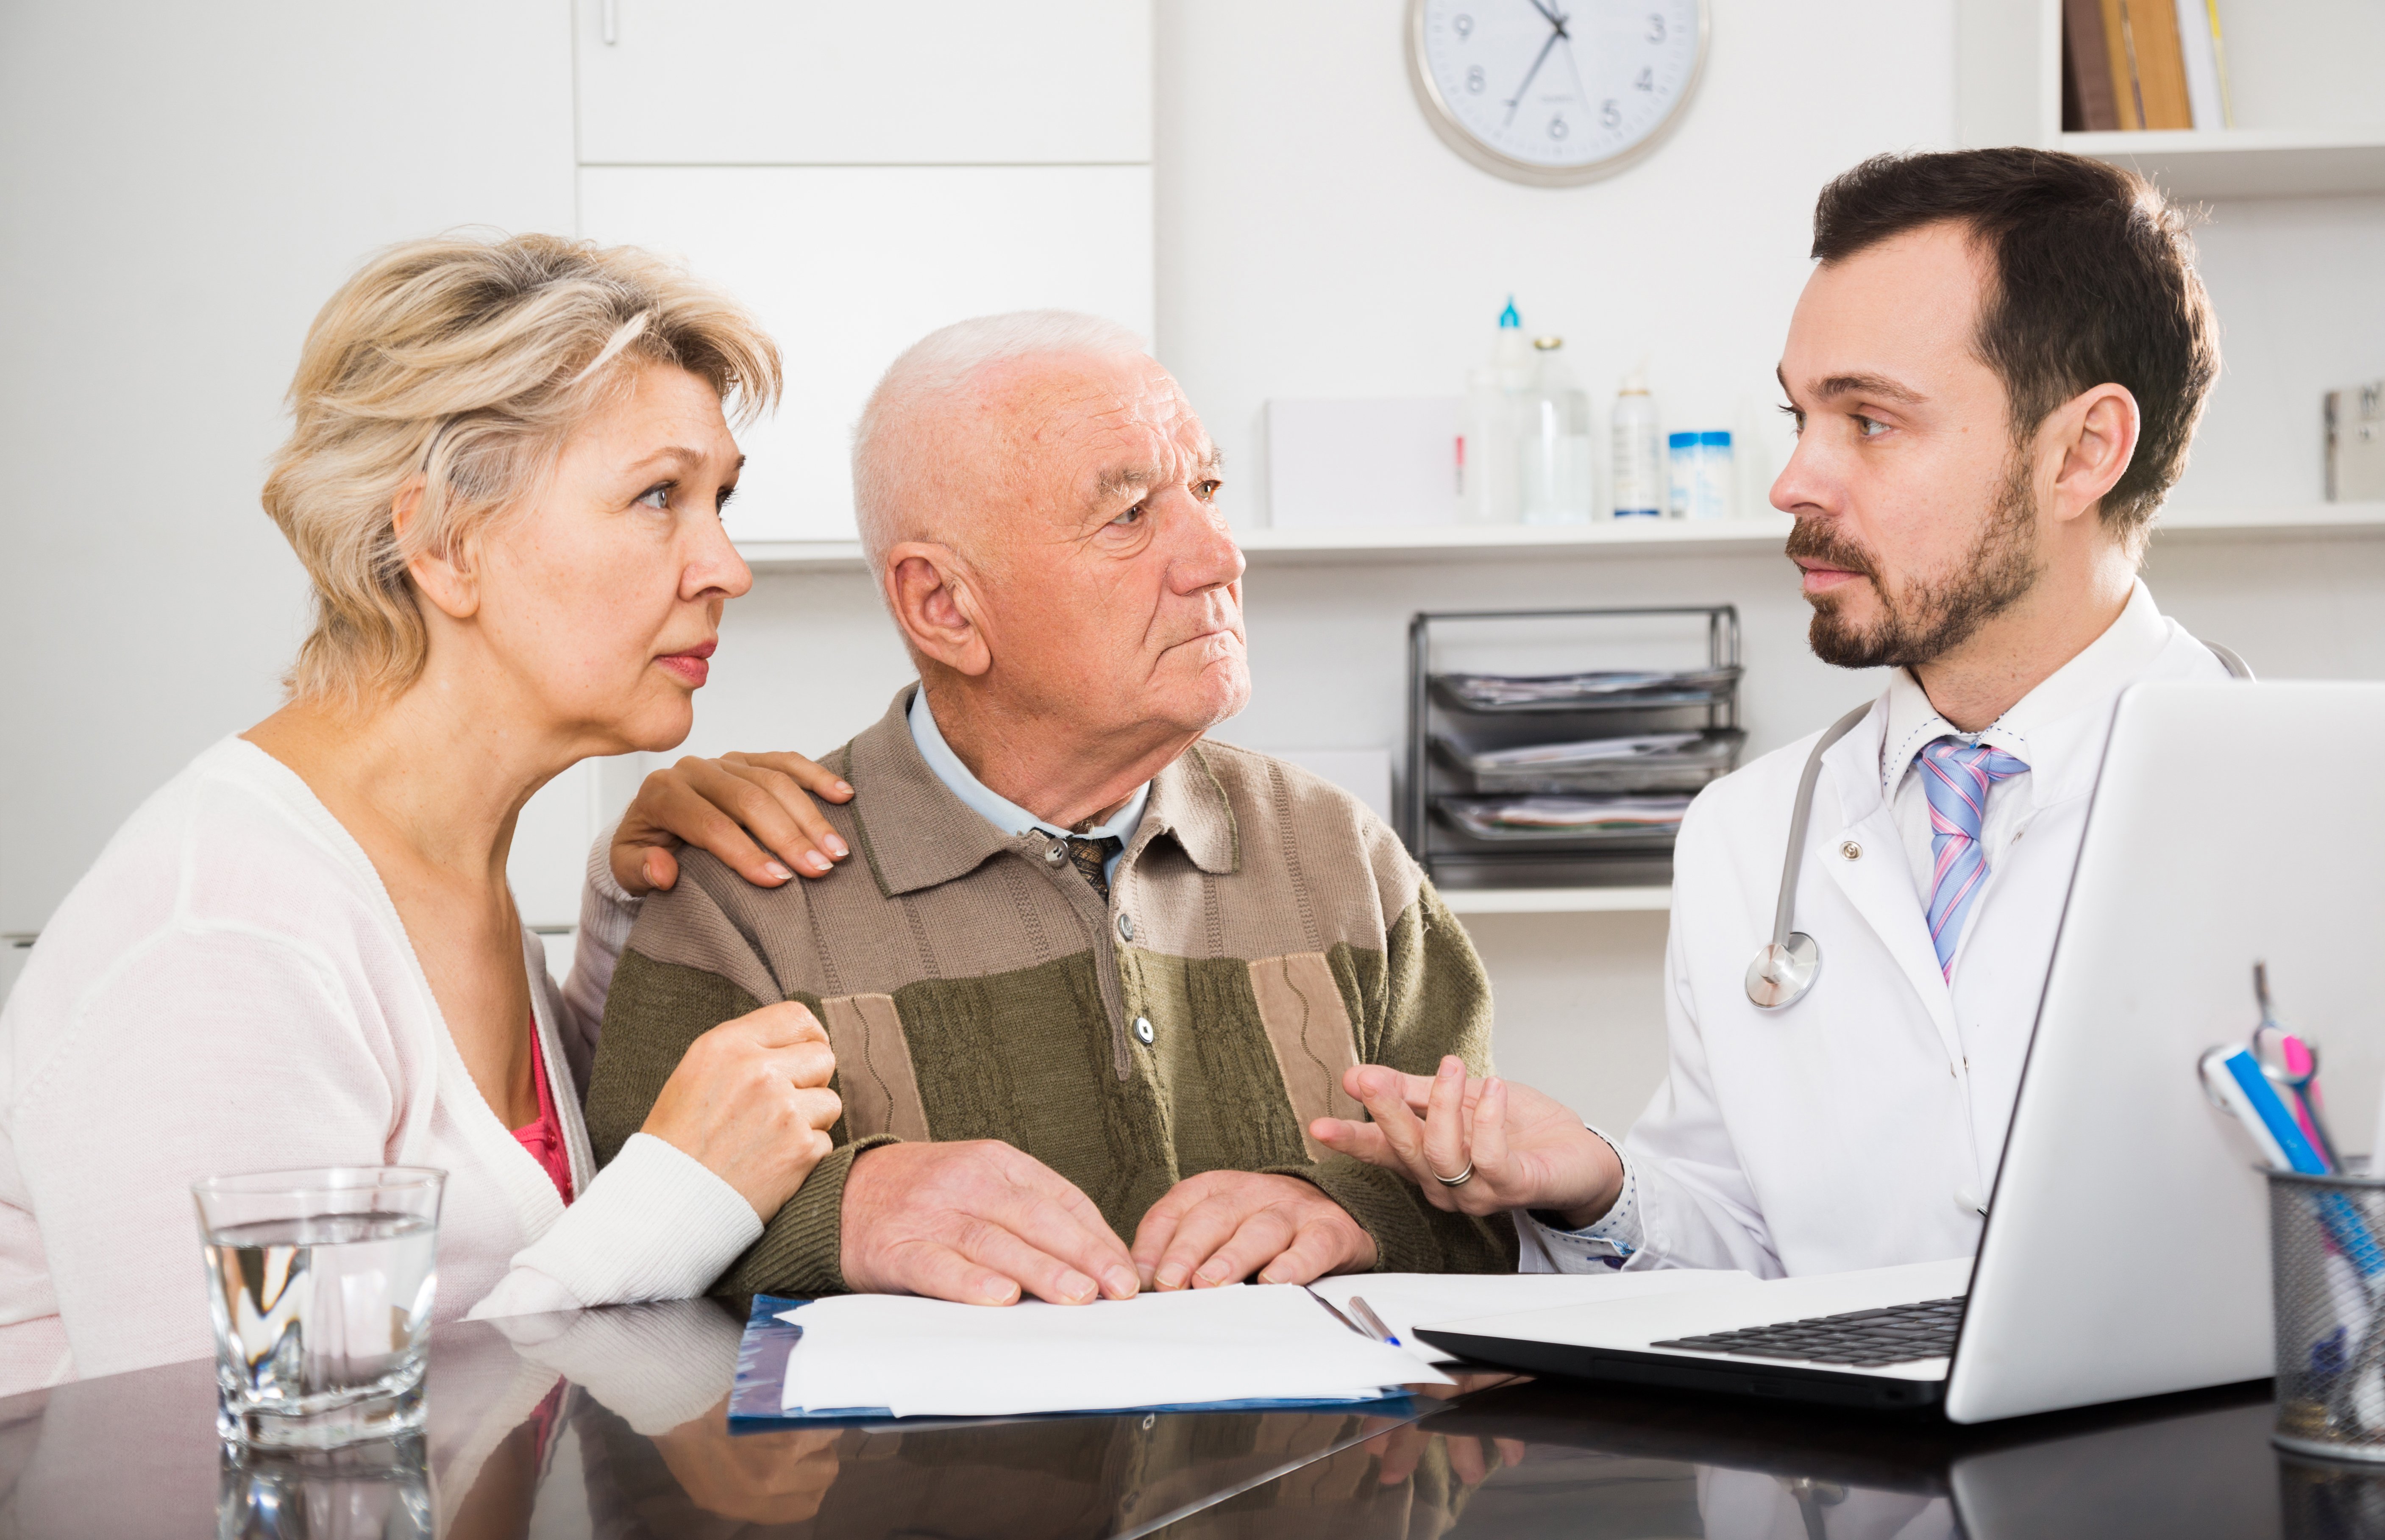 Husband and wife consulting doctor in hospital. | Source: Shutterstock